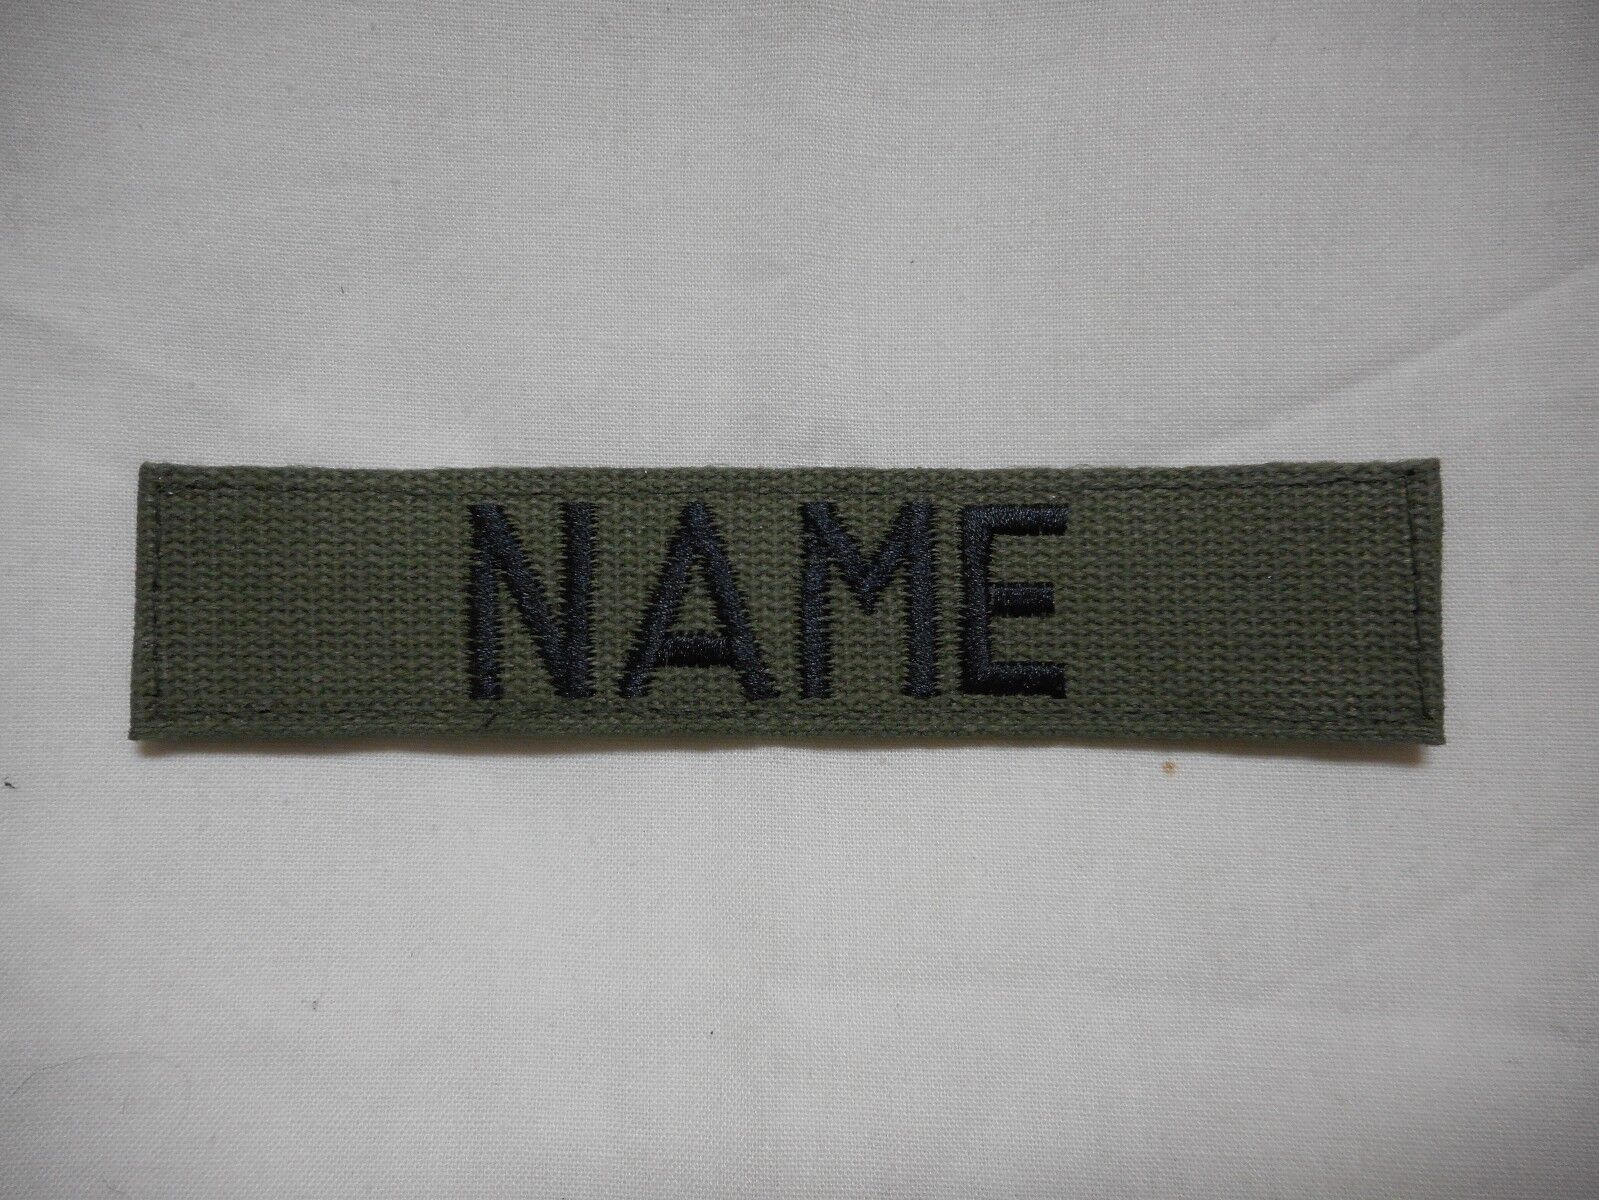 CUSTOM EMBROIDERED OD GREEN NAME TAPE, NEW, 5 INCH LENGTH, WITH HOOK  FASTENER*